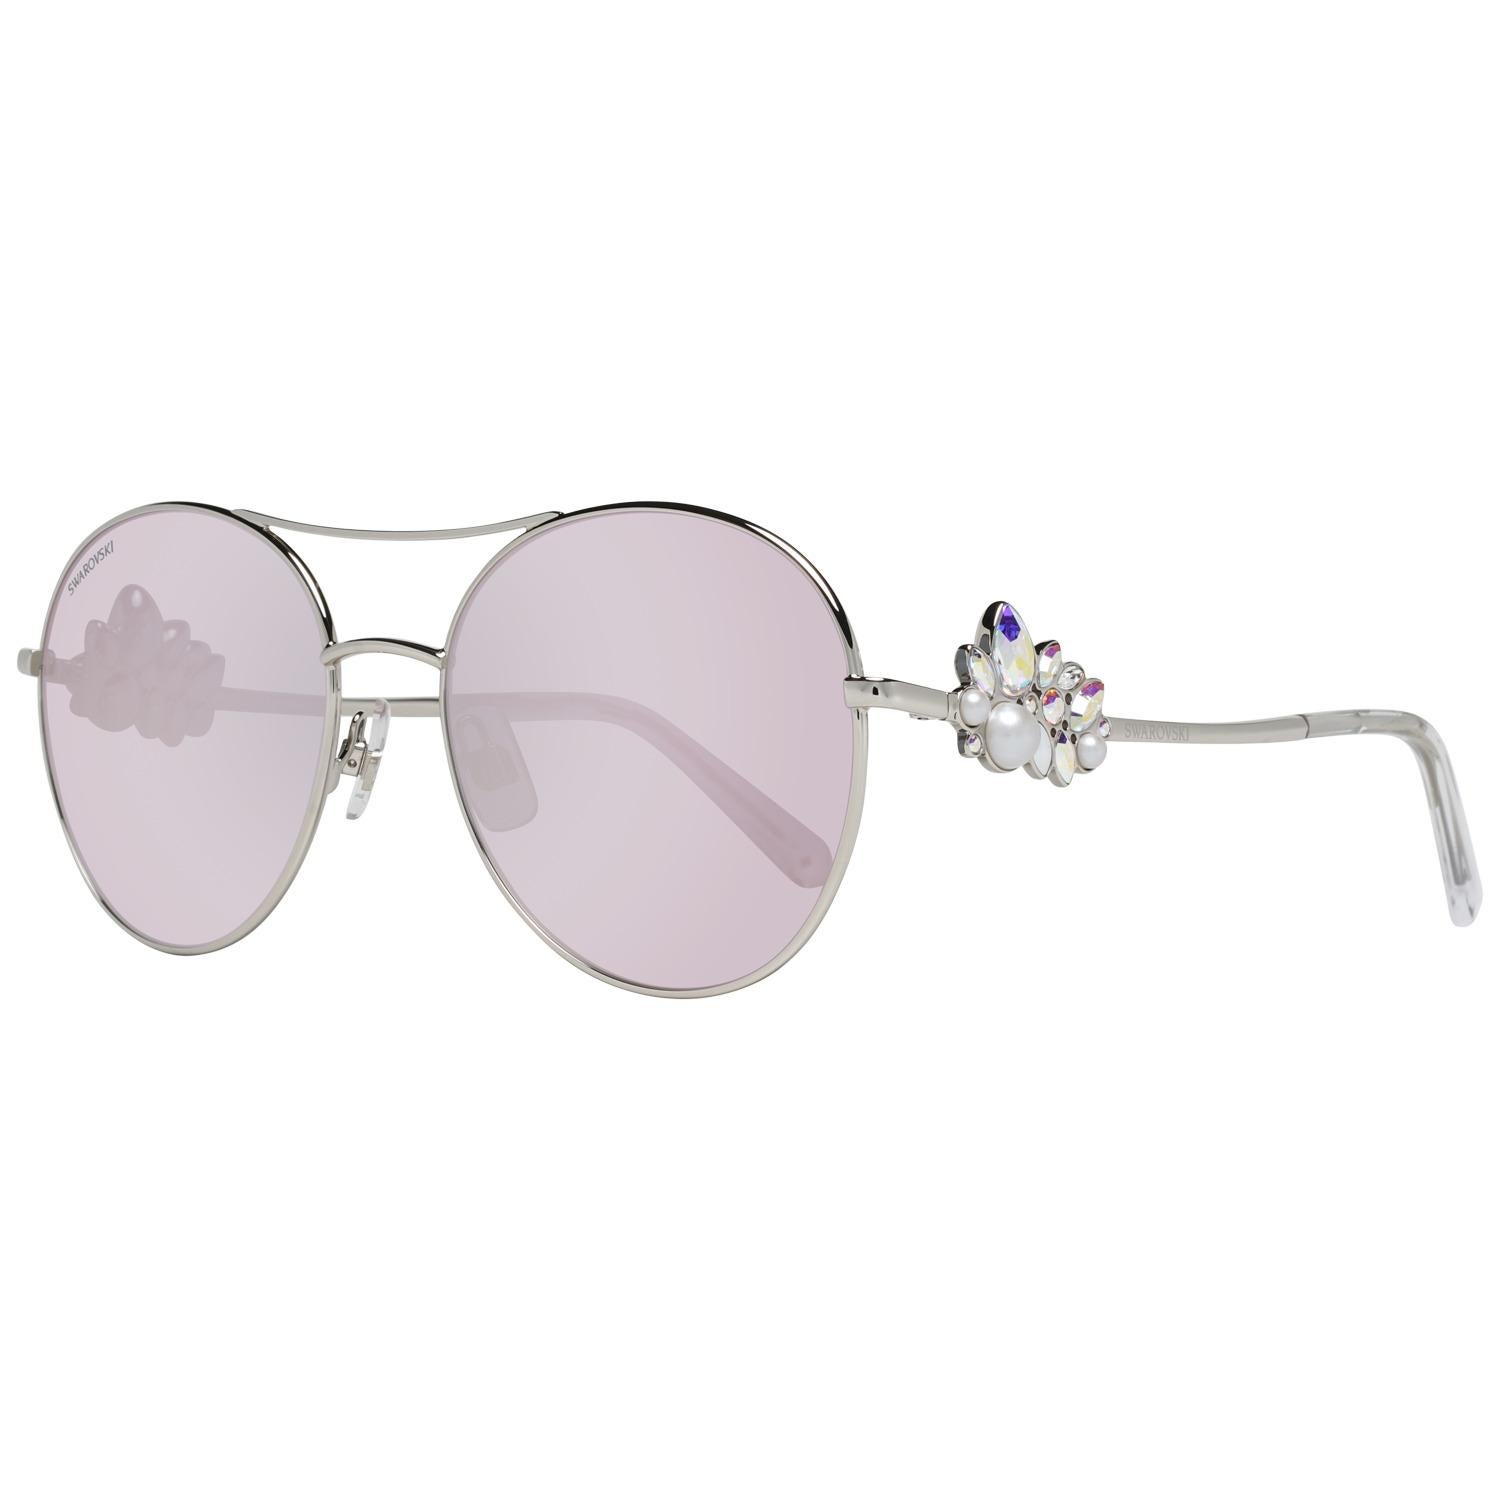 DetailsMATERIAL: MetalCOLOR: GreyMODEL: SK0278 5516ZGENDER: WomenCOUNTRY OF MANUFACTURE: ChinaTYPE: SunglassesORIGINAL CASE?: YesSTYLE: AviatorOCCASION: CasualFEATURES: LightweightLENS COLOR: LENS TECHNOLOGY: GradientYEAR MANUFACTURED: